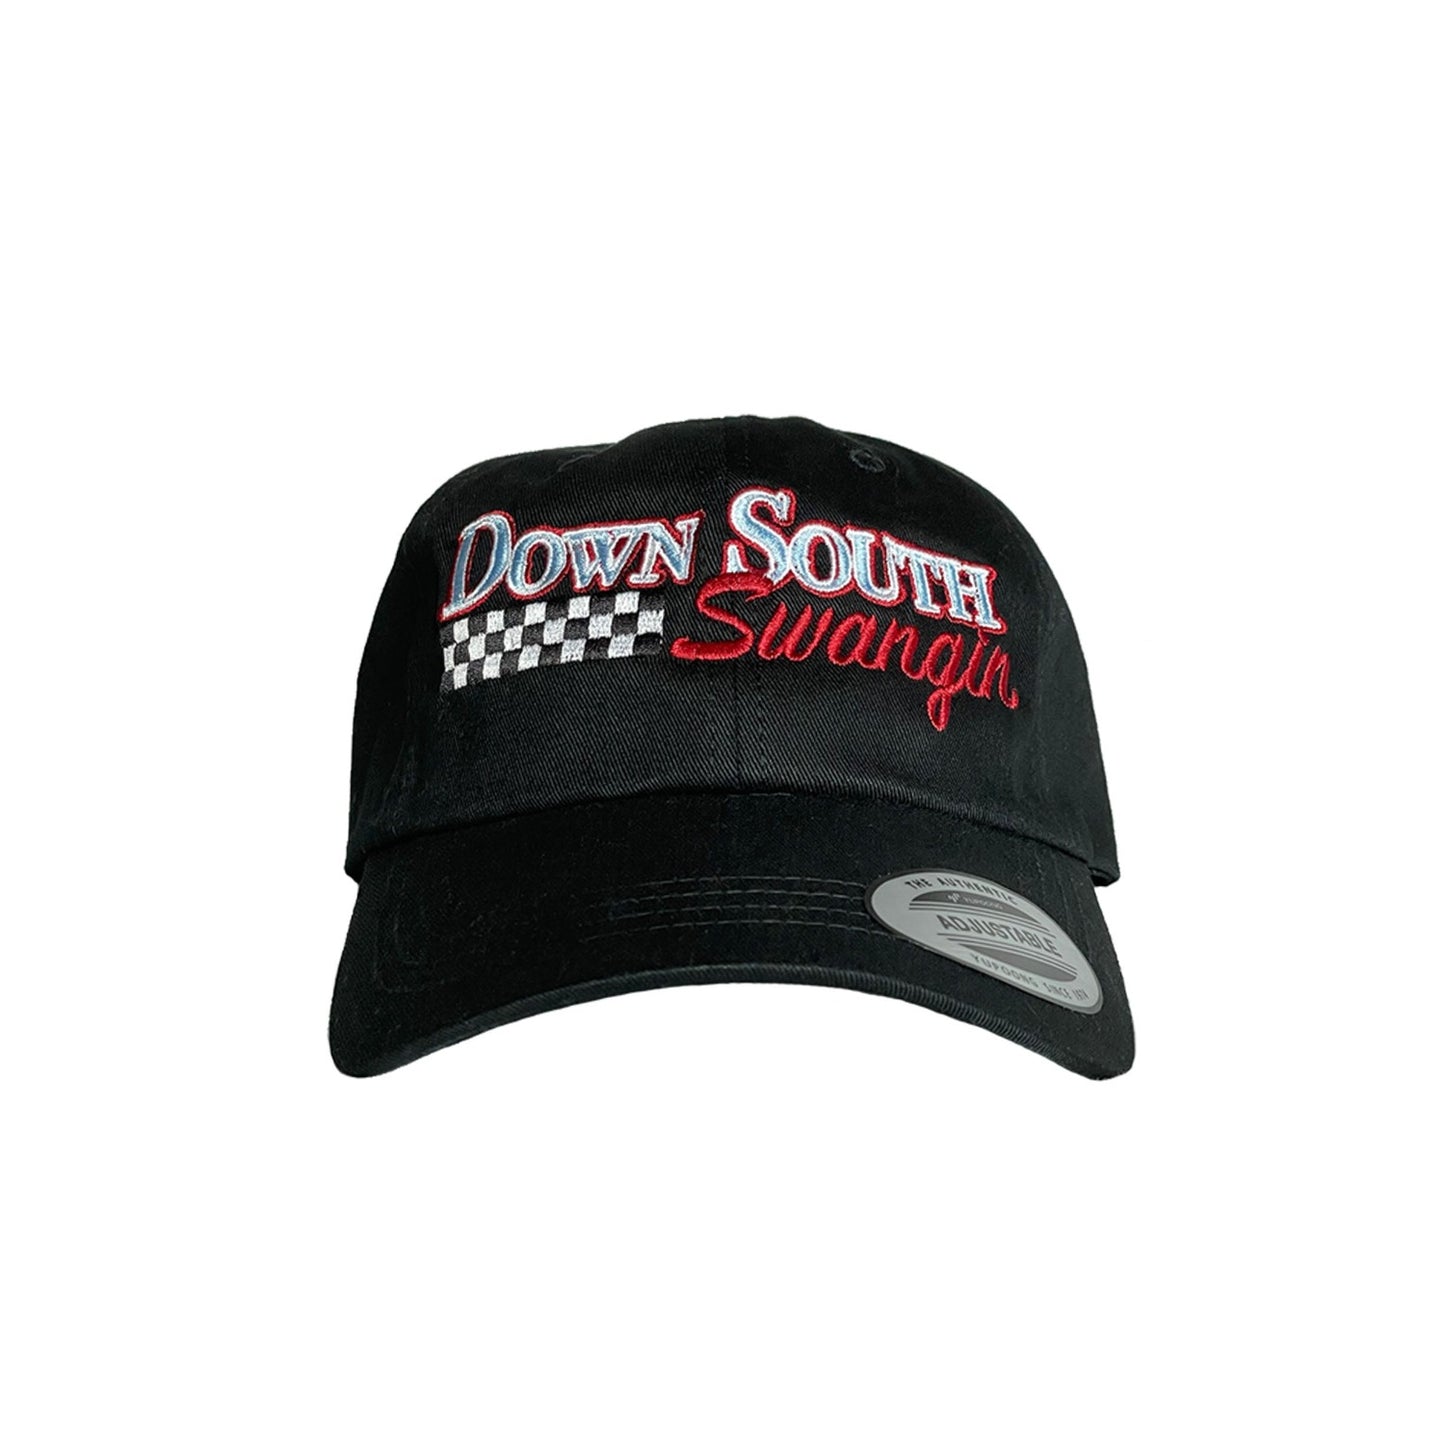 Down South Swangin' Hat